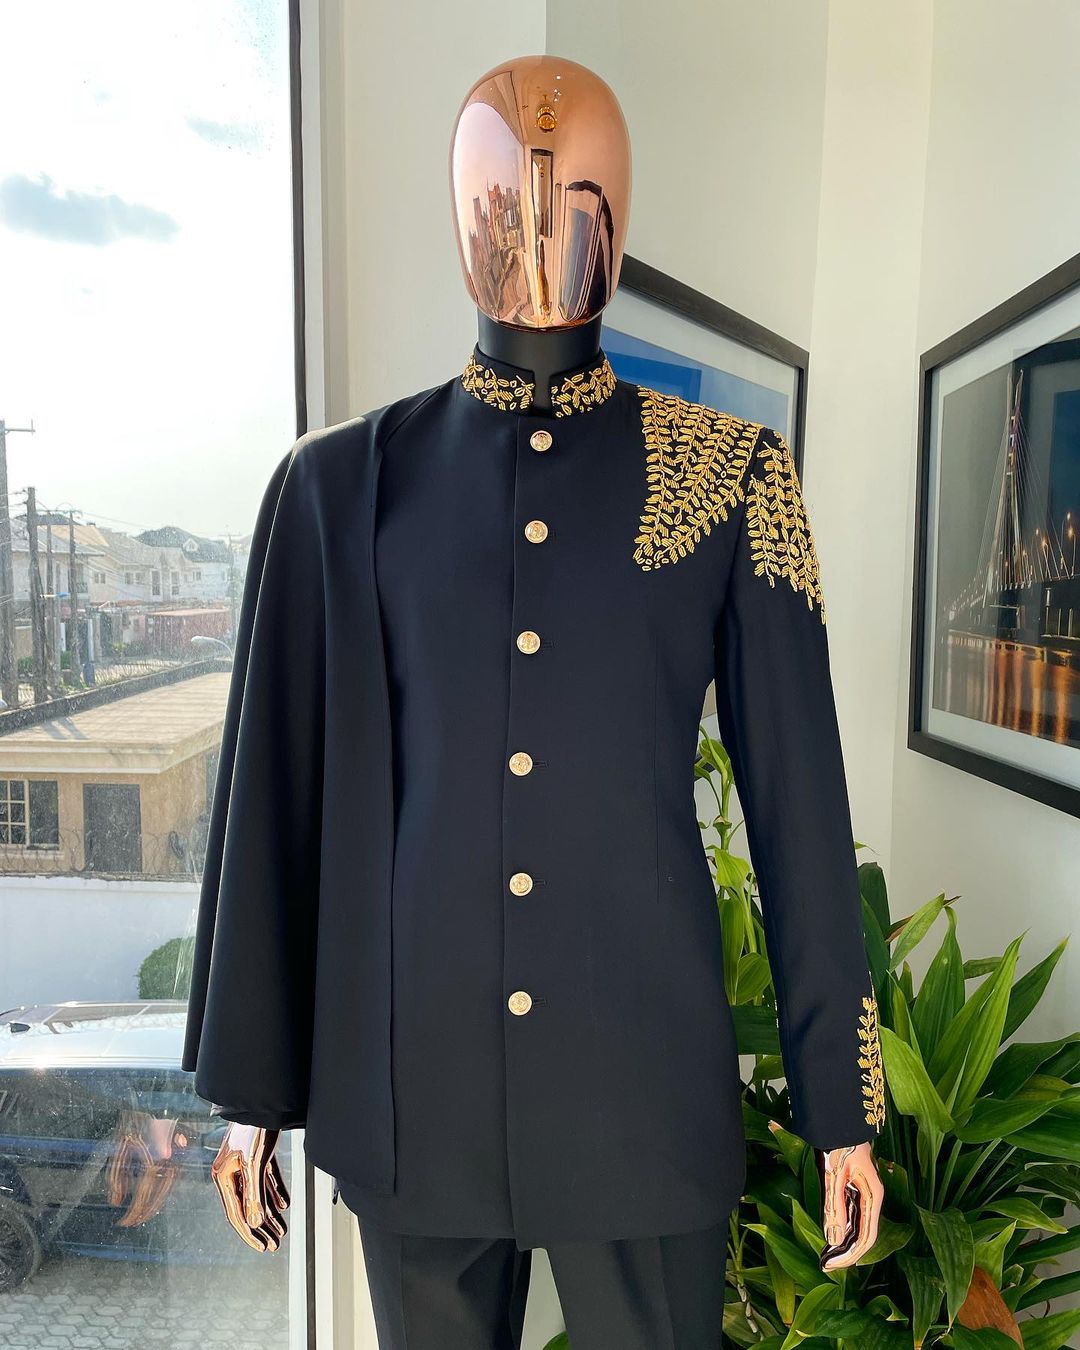 A Reloaded Charcoal Black Slant Front With Interconnected Gold Chain “French”  Safari Suit And Matching Pant Trousers